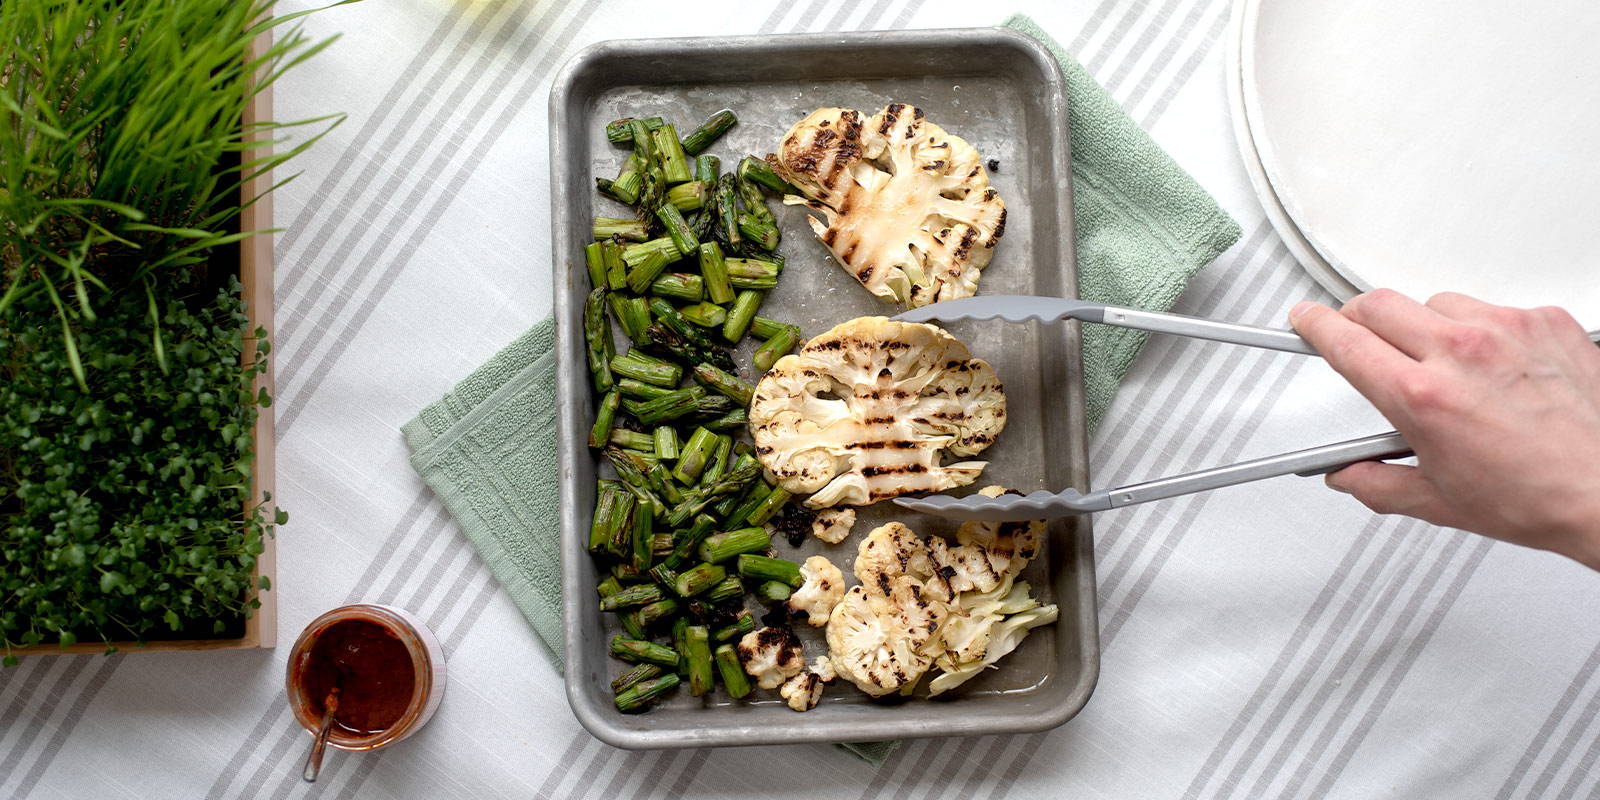 A half sheet pan filled with bite-sized just-grilled asparagus and slices of cauliflower